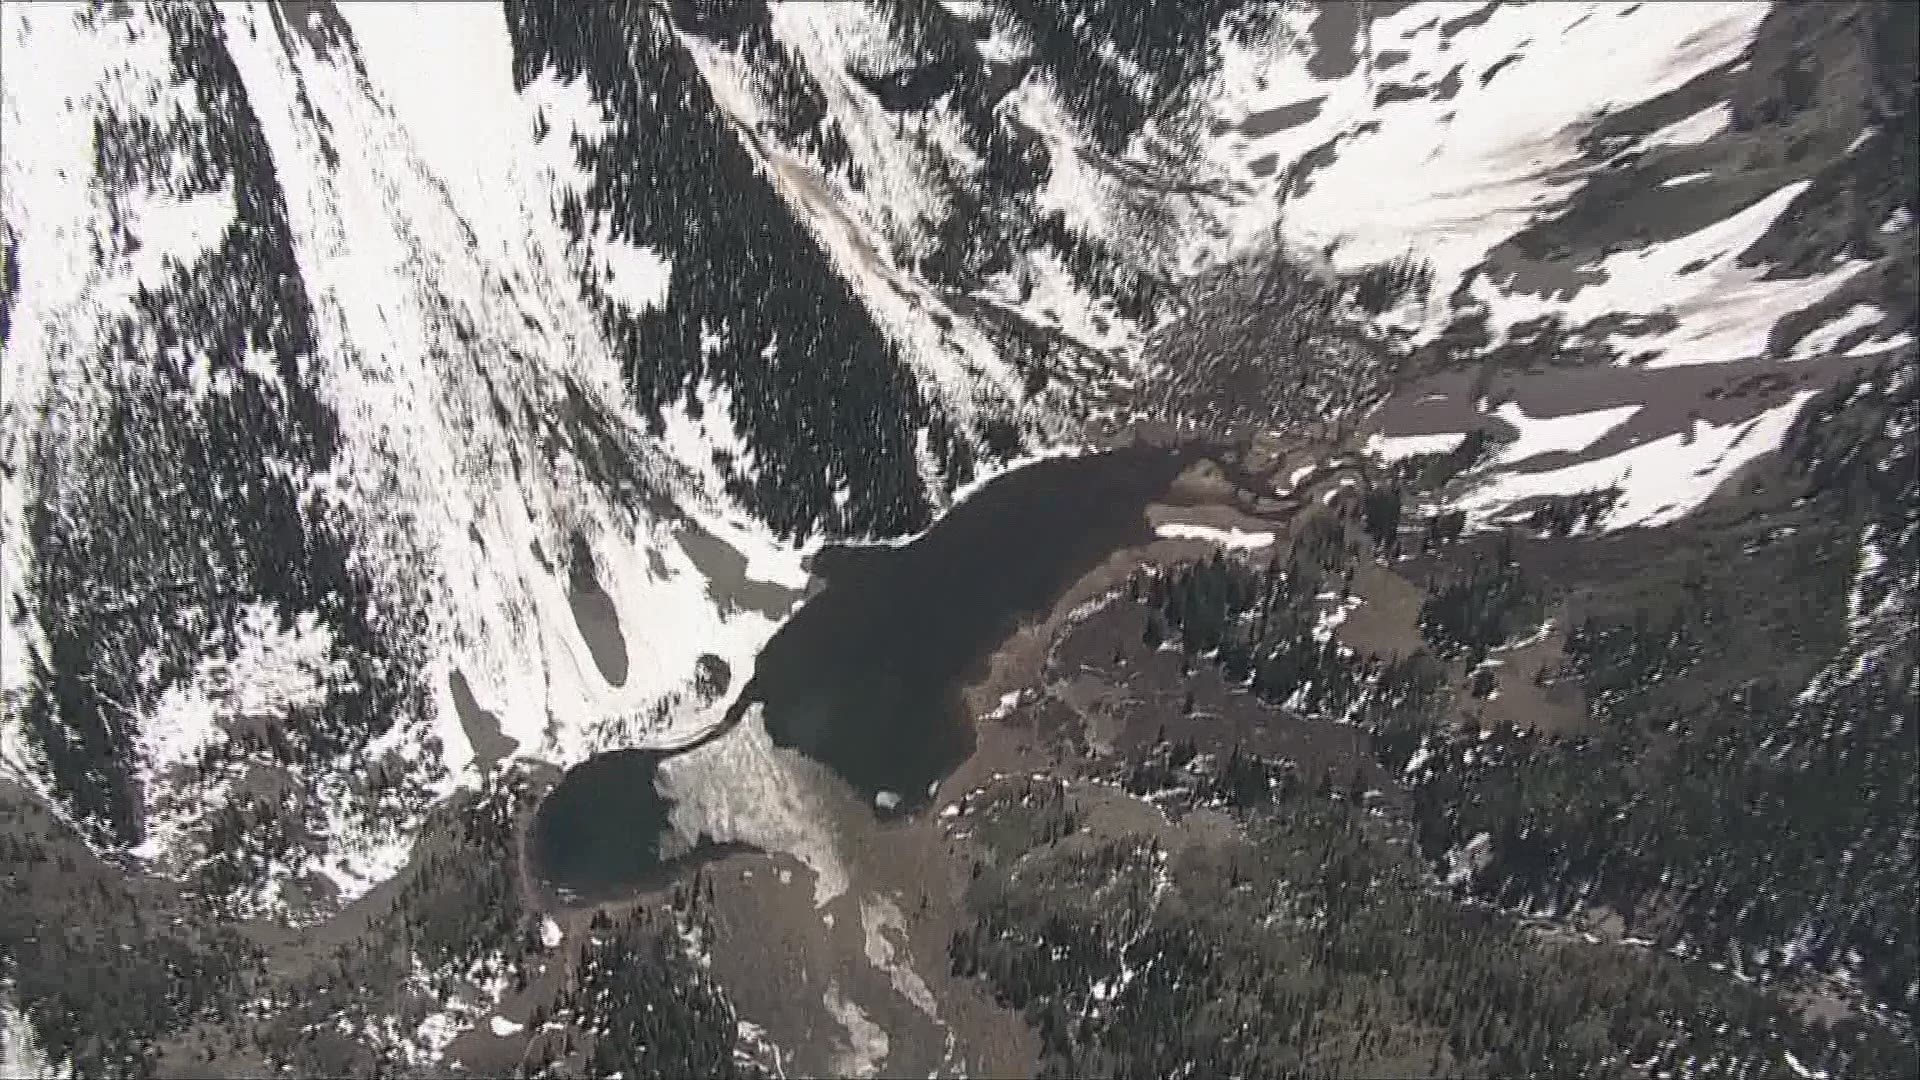 Sky9 footage shows the extent of the tree damage around Maroon Lake. The bells opened later than normal this year due to the amount of avalanche debris on the road leading up to the lake.